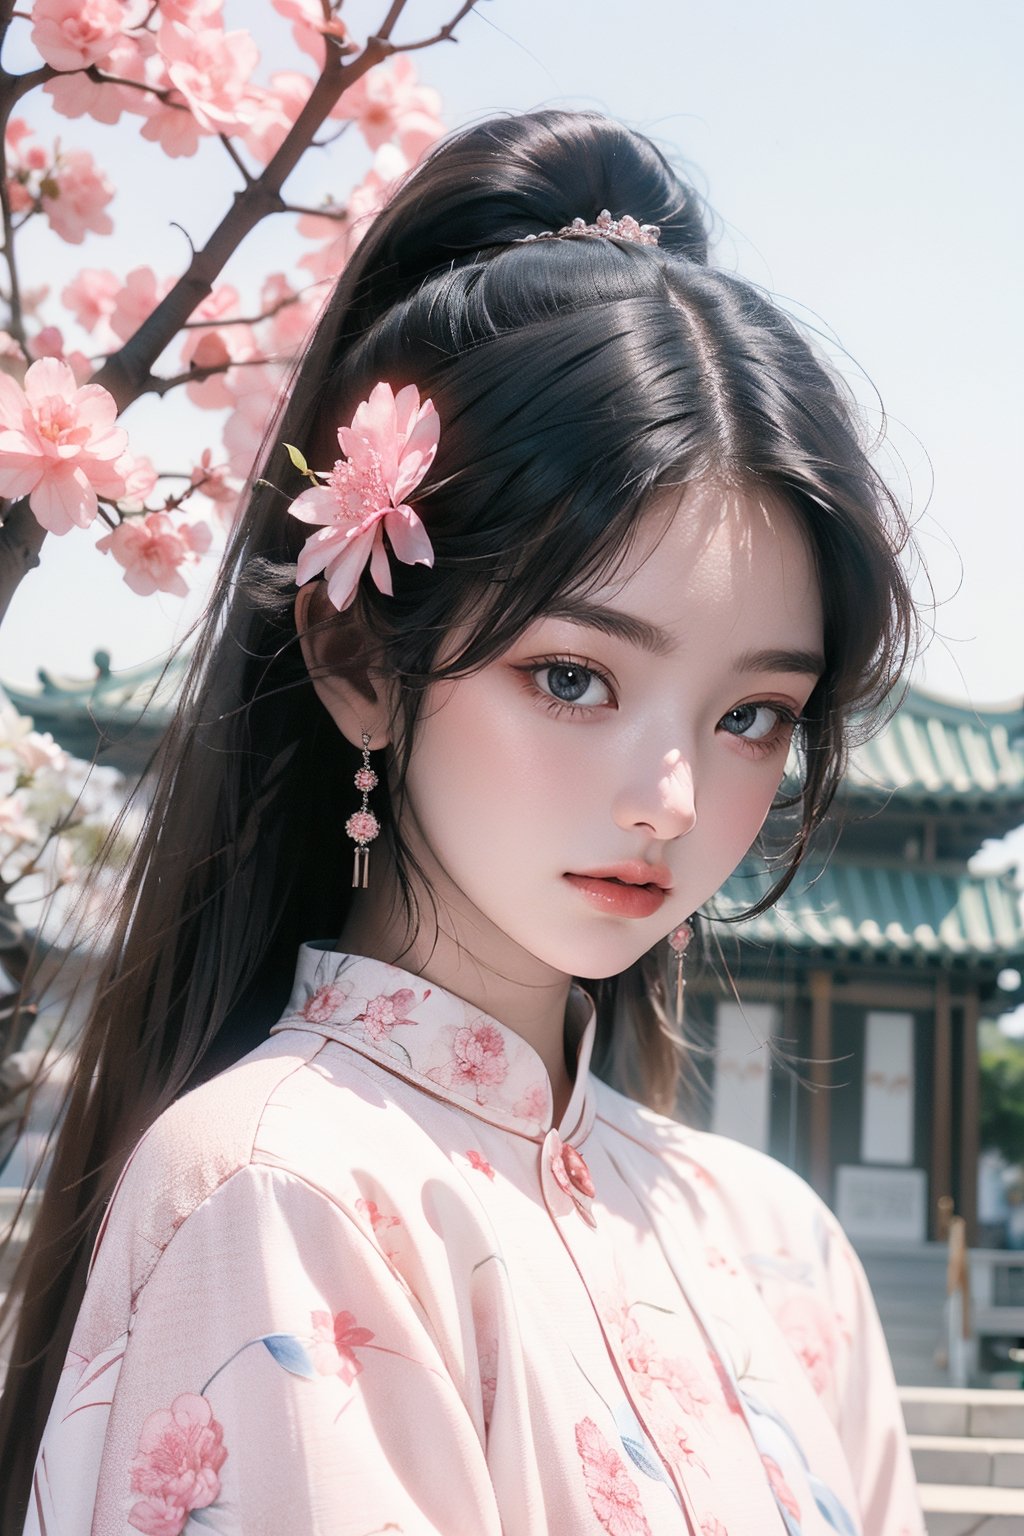 A 18-year-old Korean beauty,in the sakura flowers.
face closeup
temple in the background